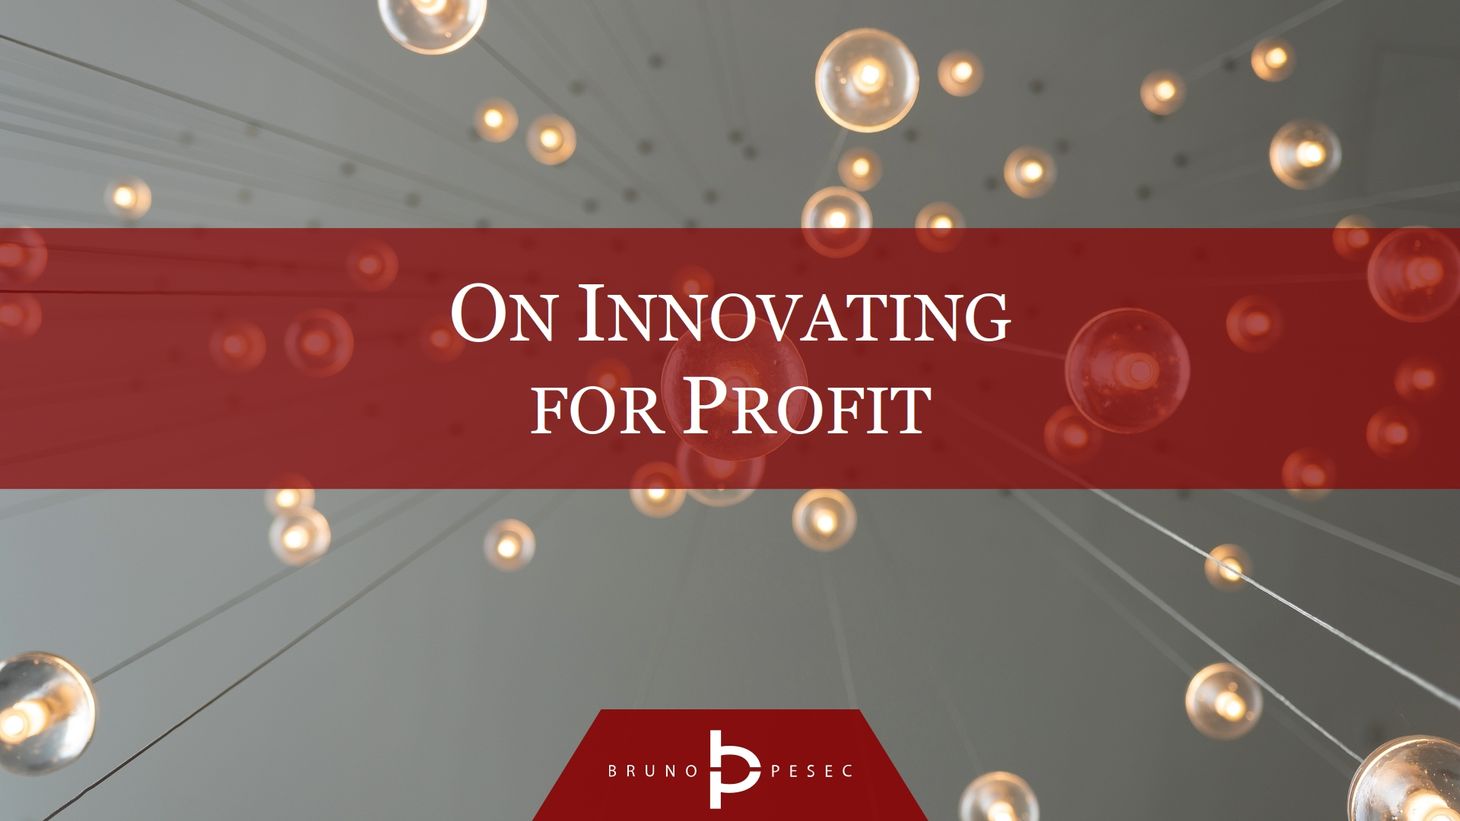 On innovating for profit